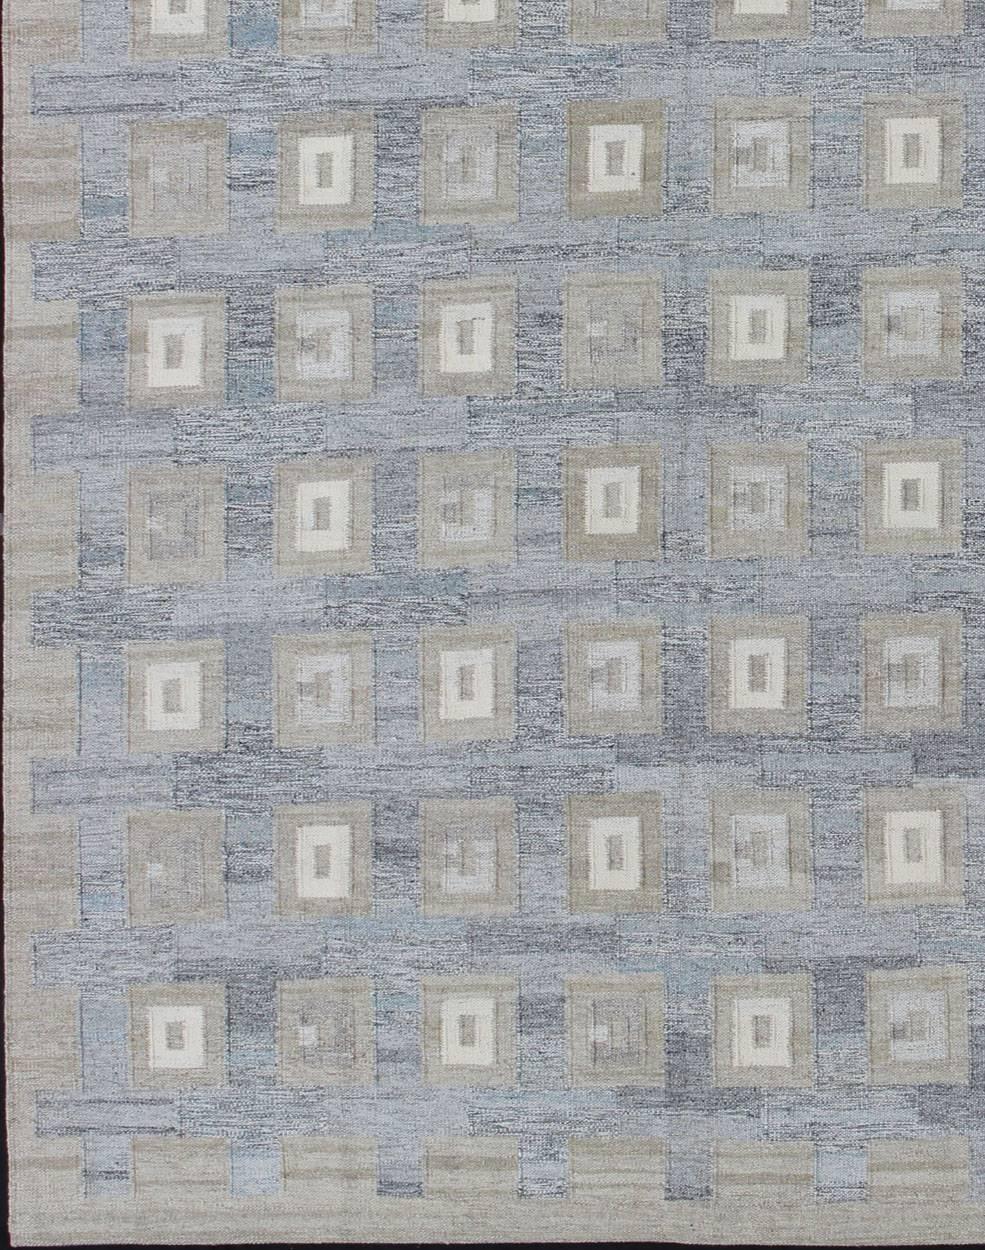 Large Modern Scandinavian/ Swedish Geometric Design Rug in Squares by Keivan Woven Arts.

Measures: 10'4 x 13'9.

Large Modern Scandinavian/ Swedish Geometric Design Rug in Squares.
This Scandinavian Flat-Weave patterned rug is inspired by the work